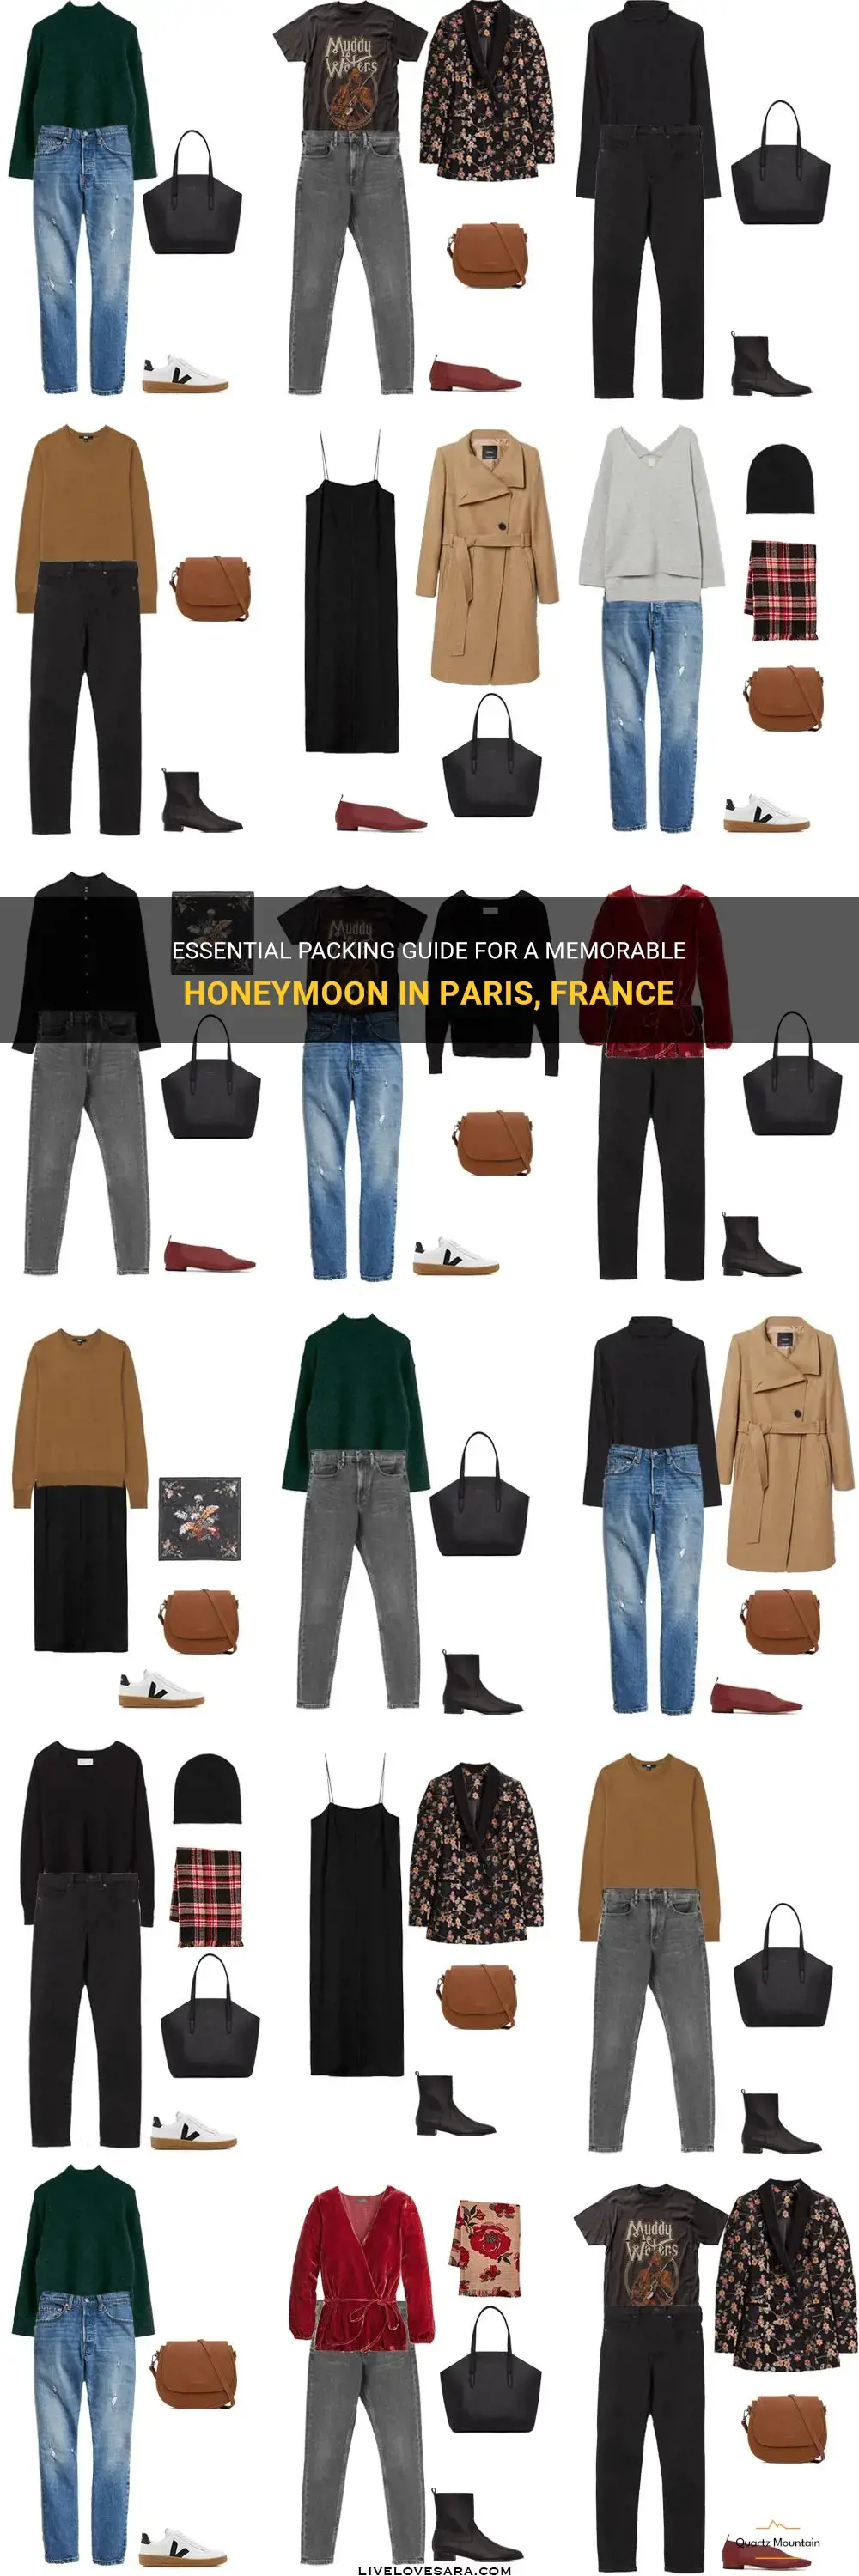 what to pack for may honeymoon in paris france